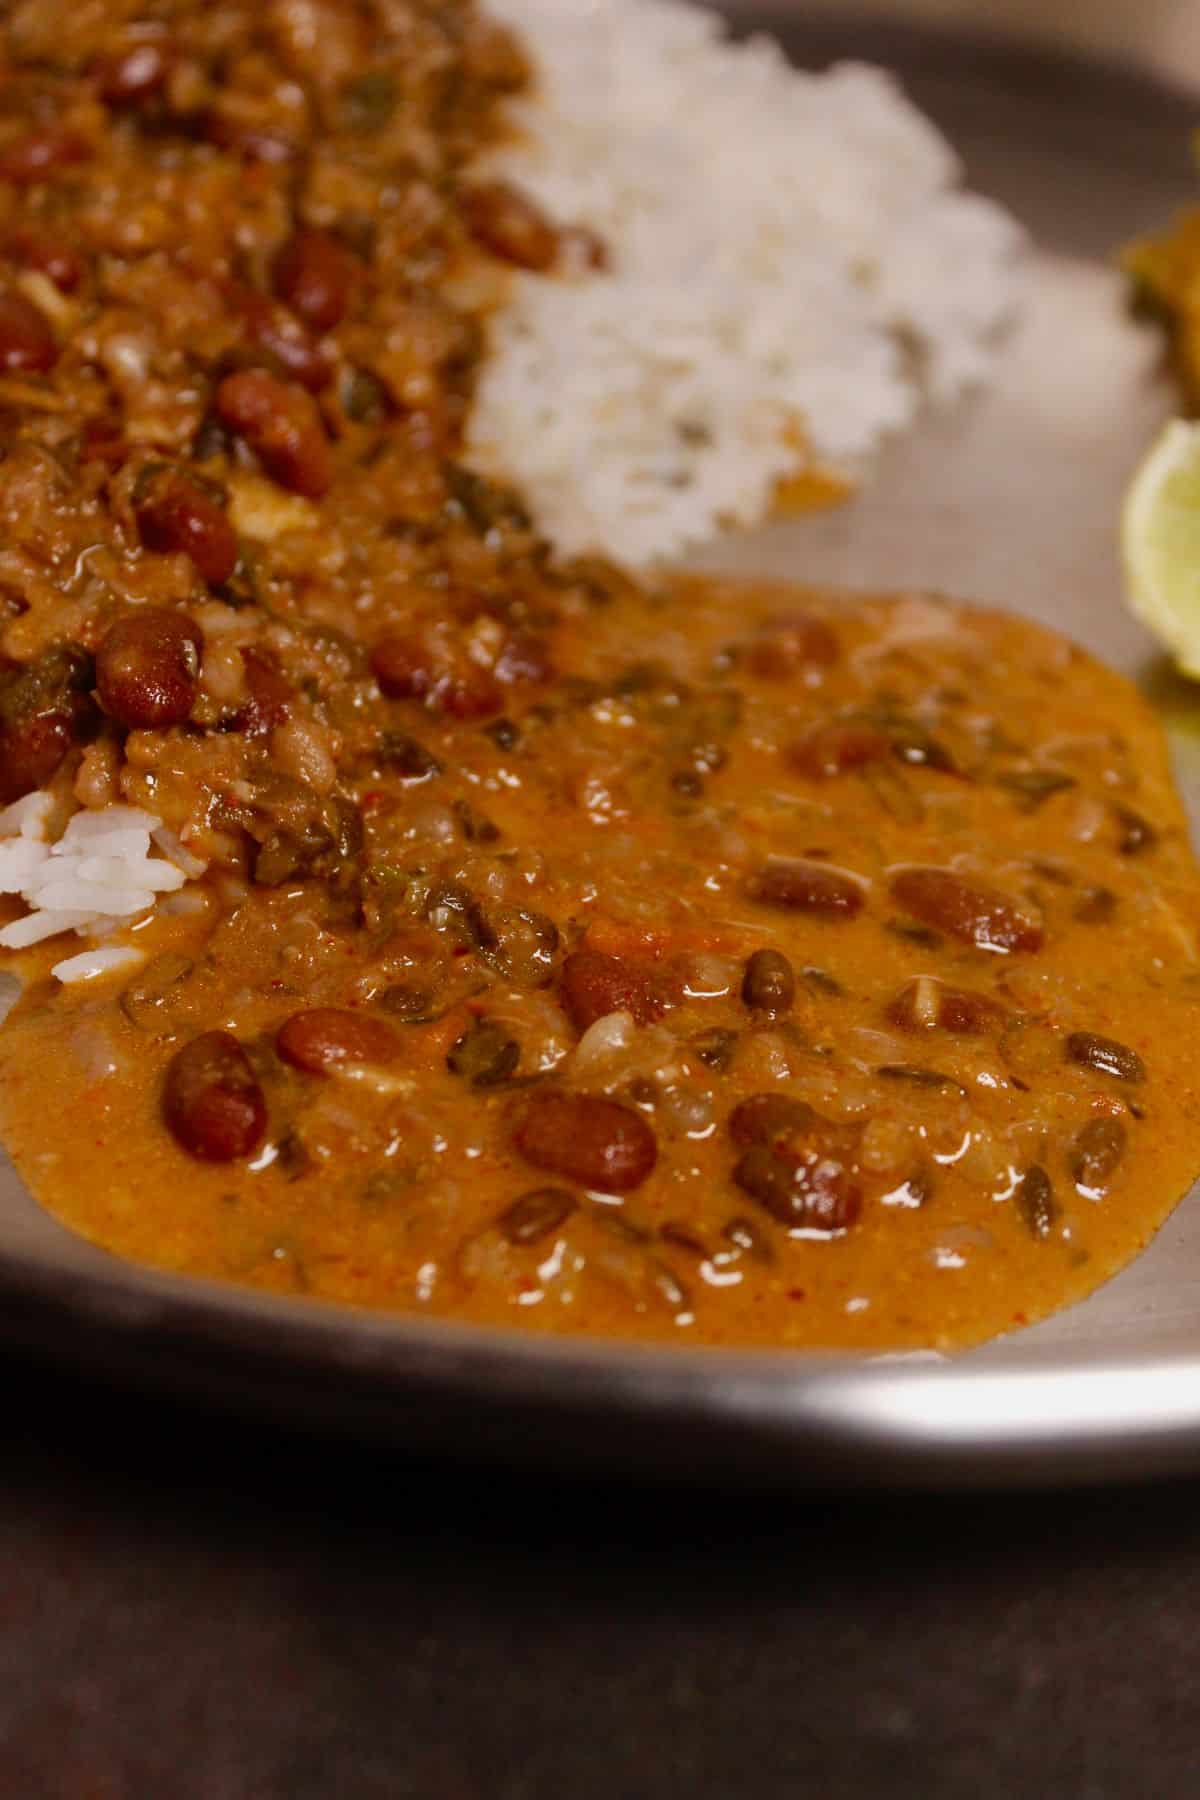 spicy Dhaba style dal makhani